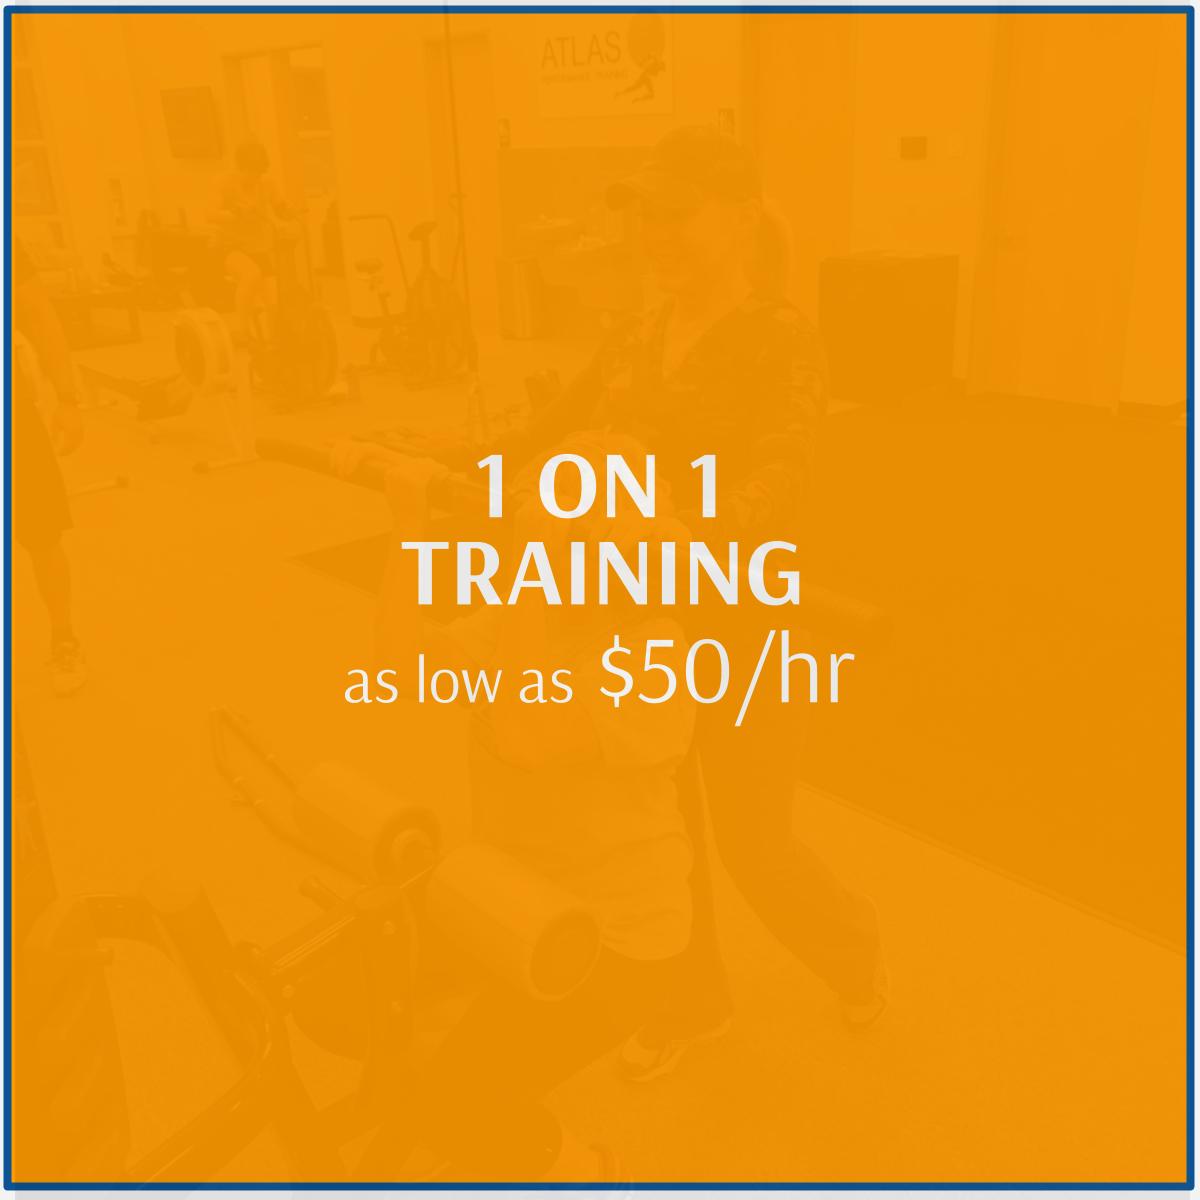 1 on 1 personal fitness training low price